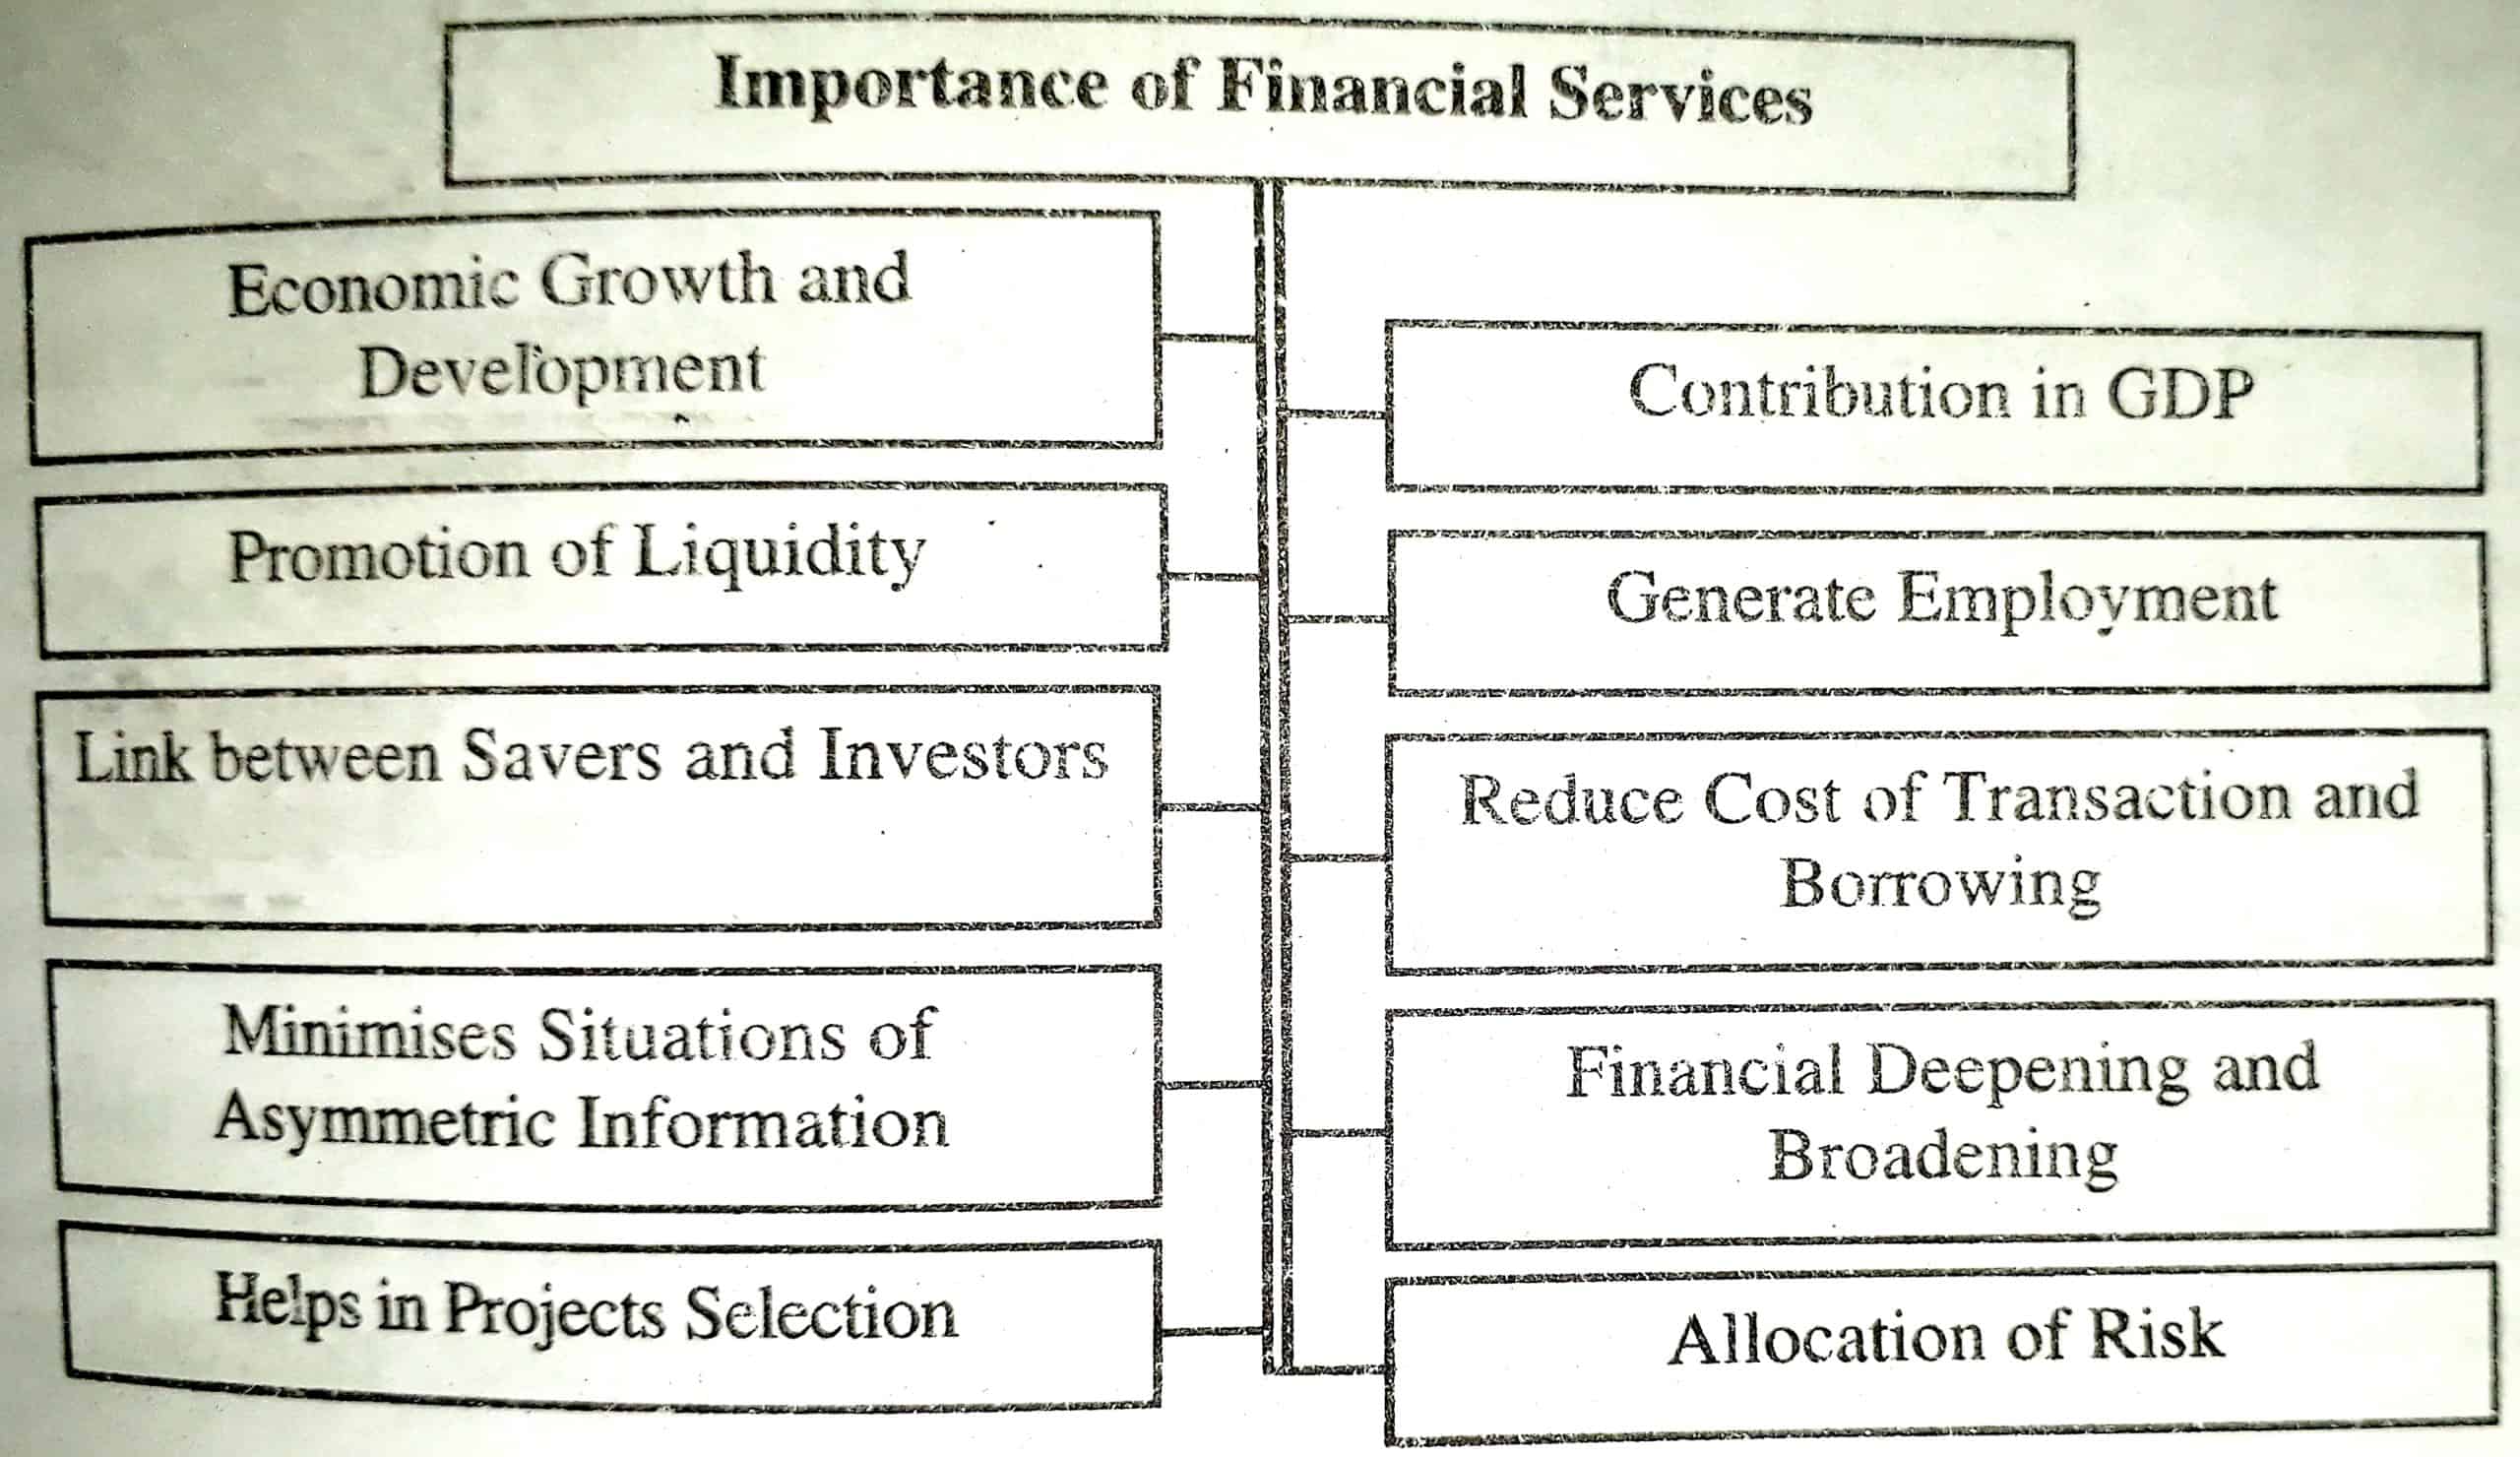 Importance of Finance Services